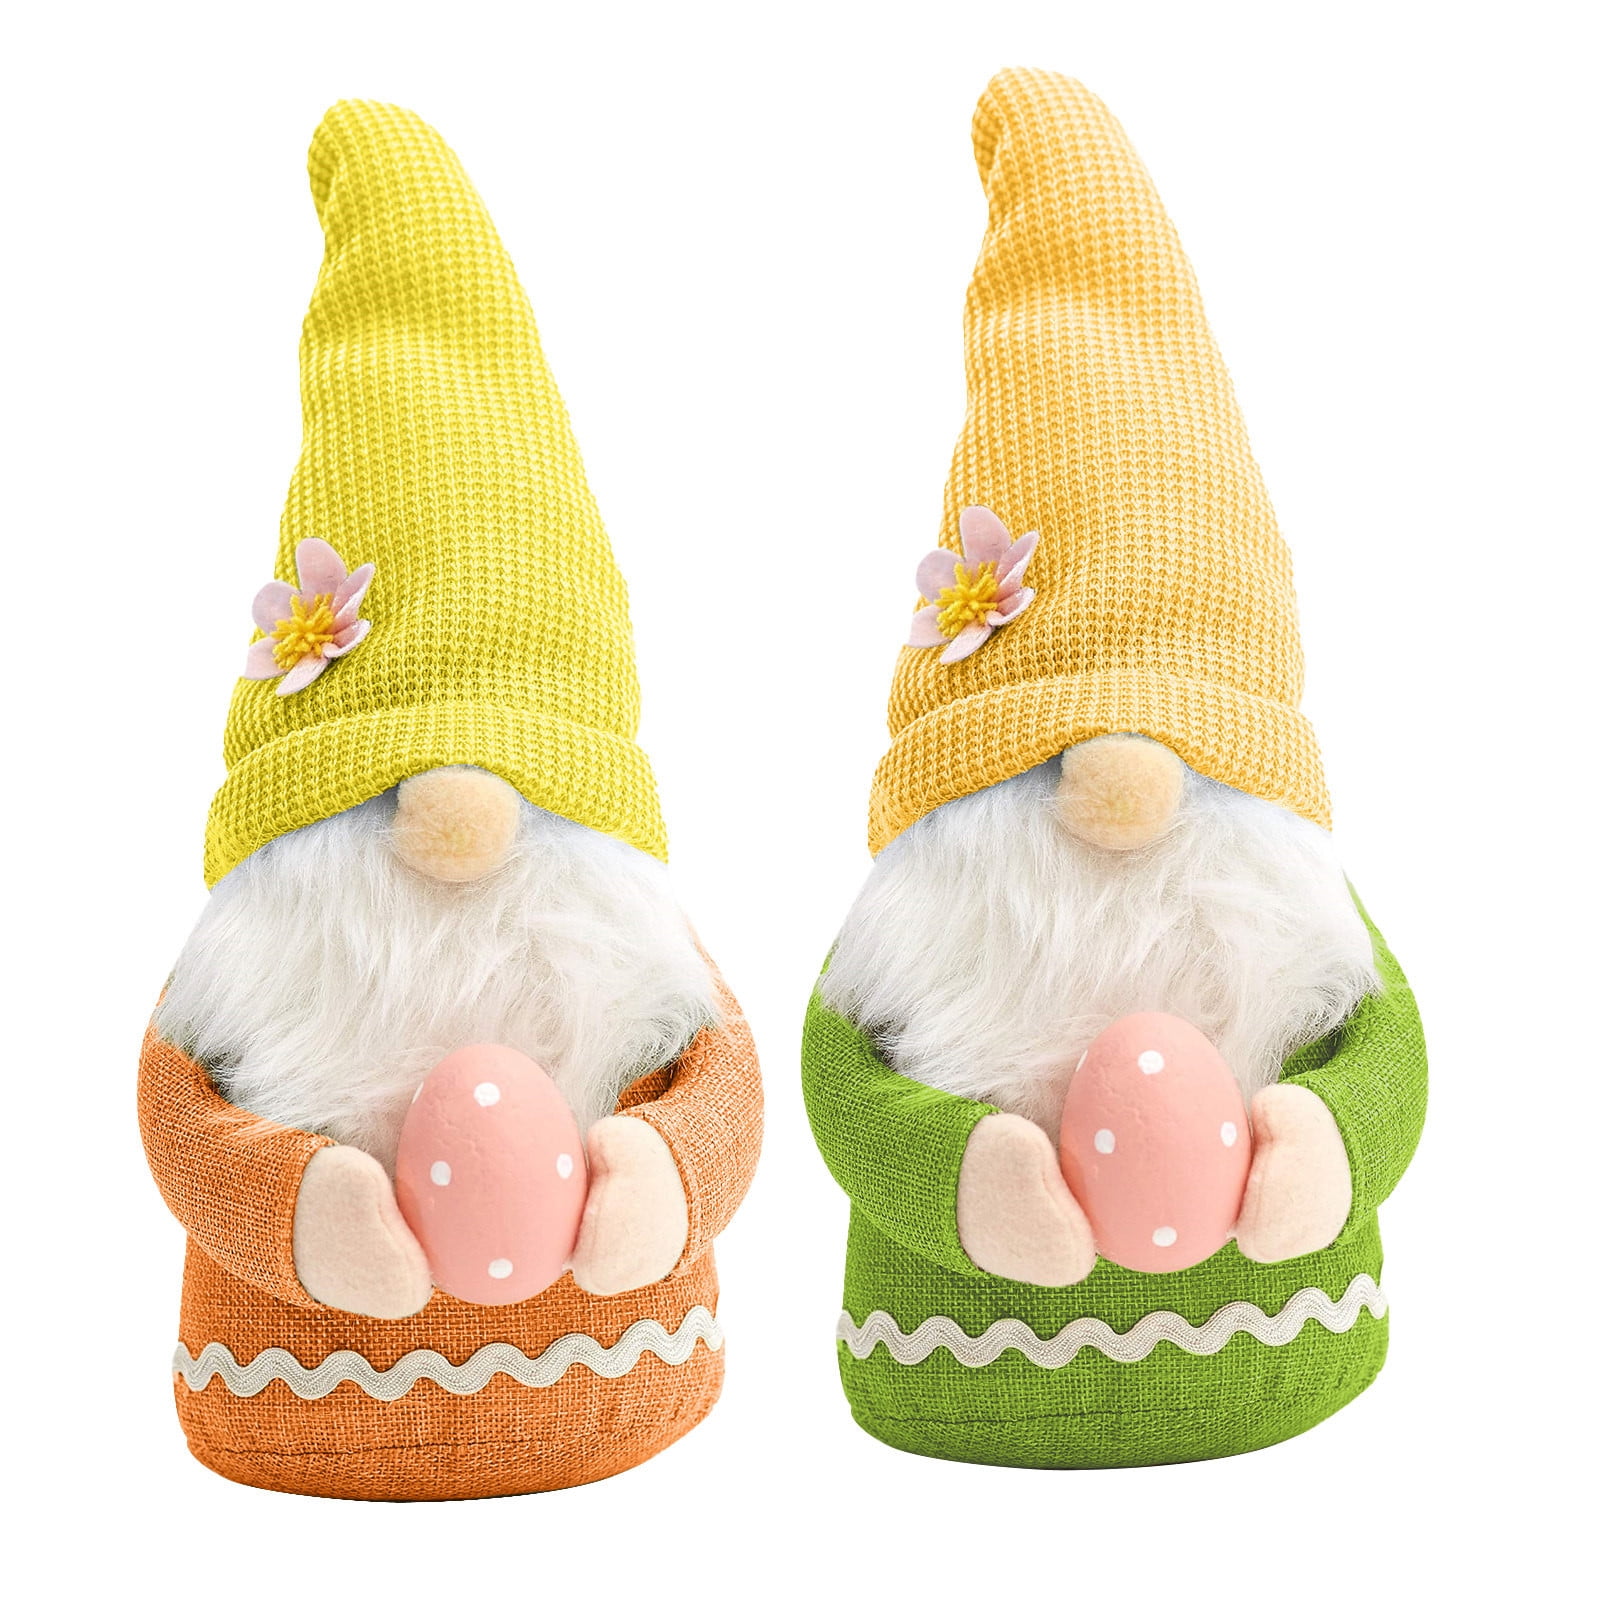 Set of 3 Easter Patriotic Gnomes Decor Girl Room Decor Gift Scandinavian Tomte Bunny Elf Dwarf Lucky Valentine Stuffed Gnomes Handmade Plush Gnomes Home Household Ornaments Fashion Gift A.Multicolor